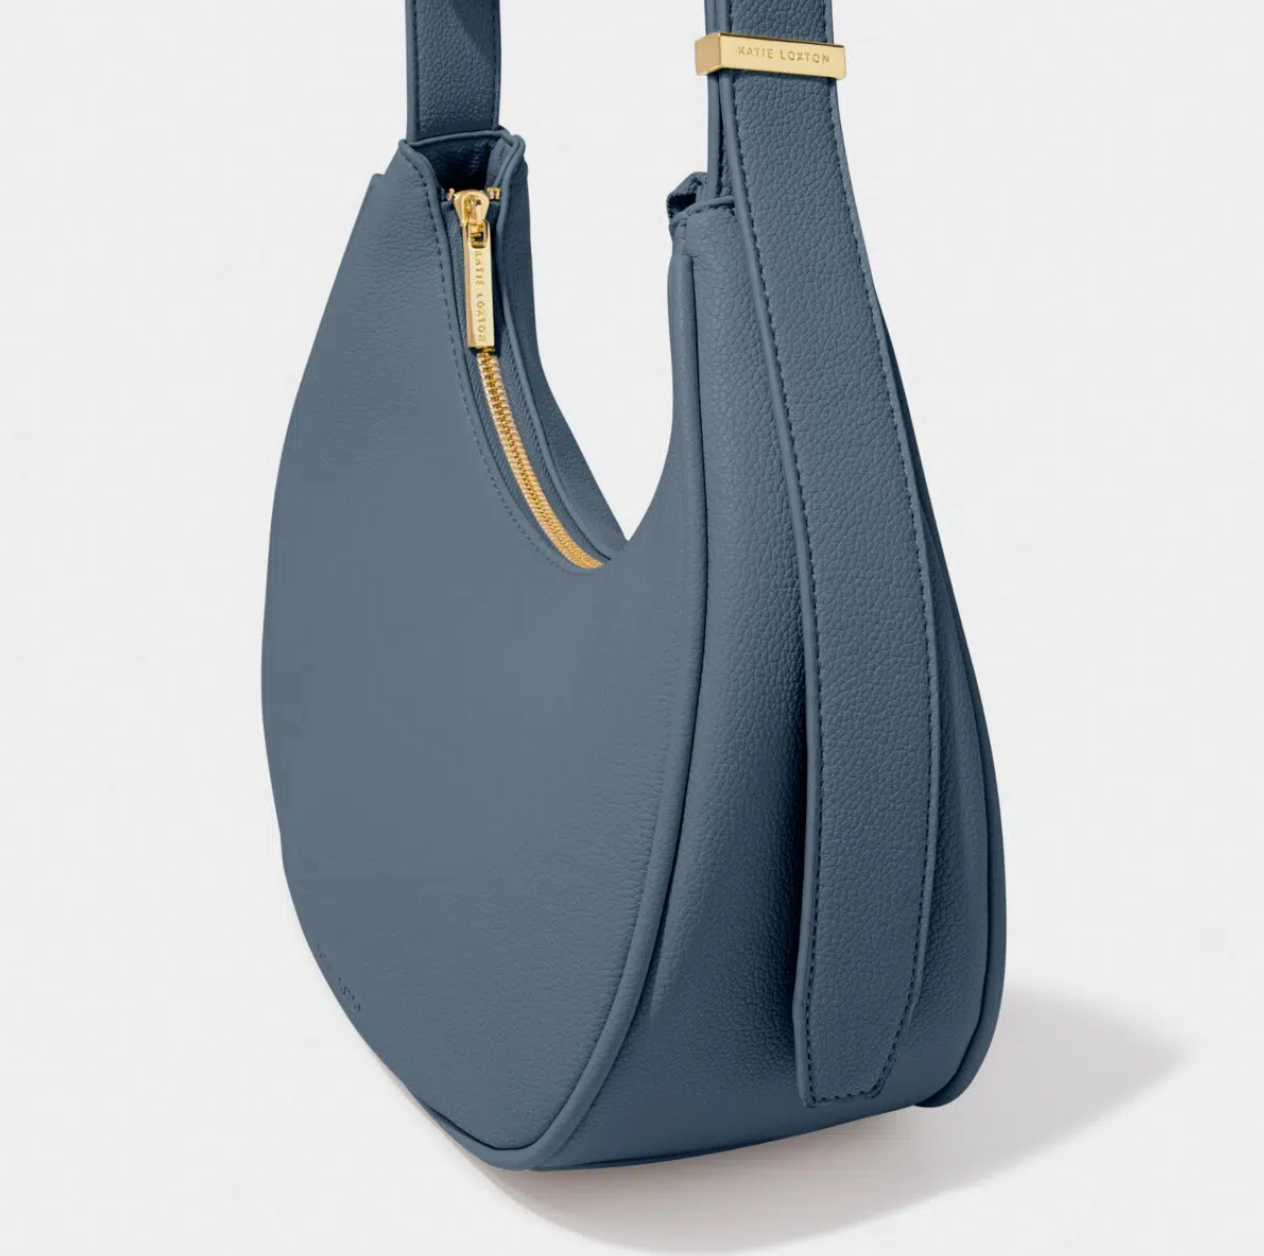 side view of navy blue scoop style handbag with gold zip against a white background